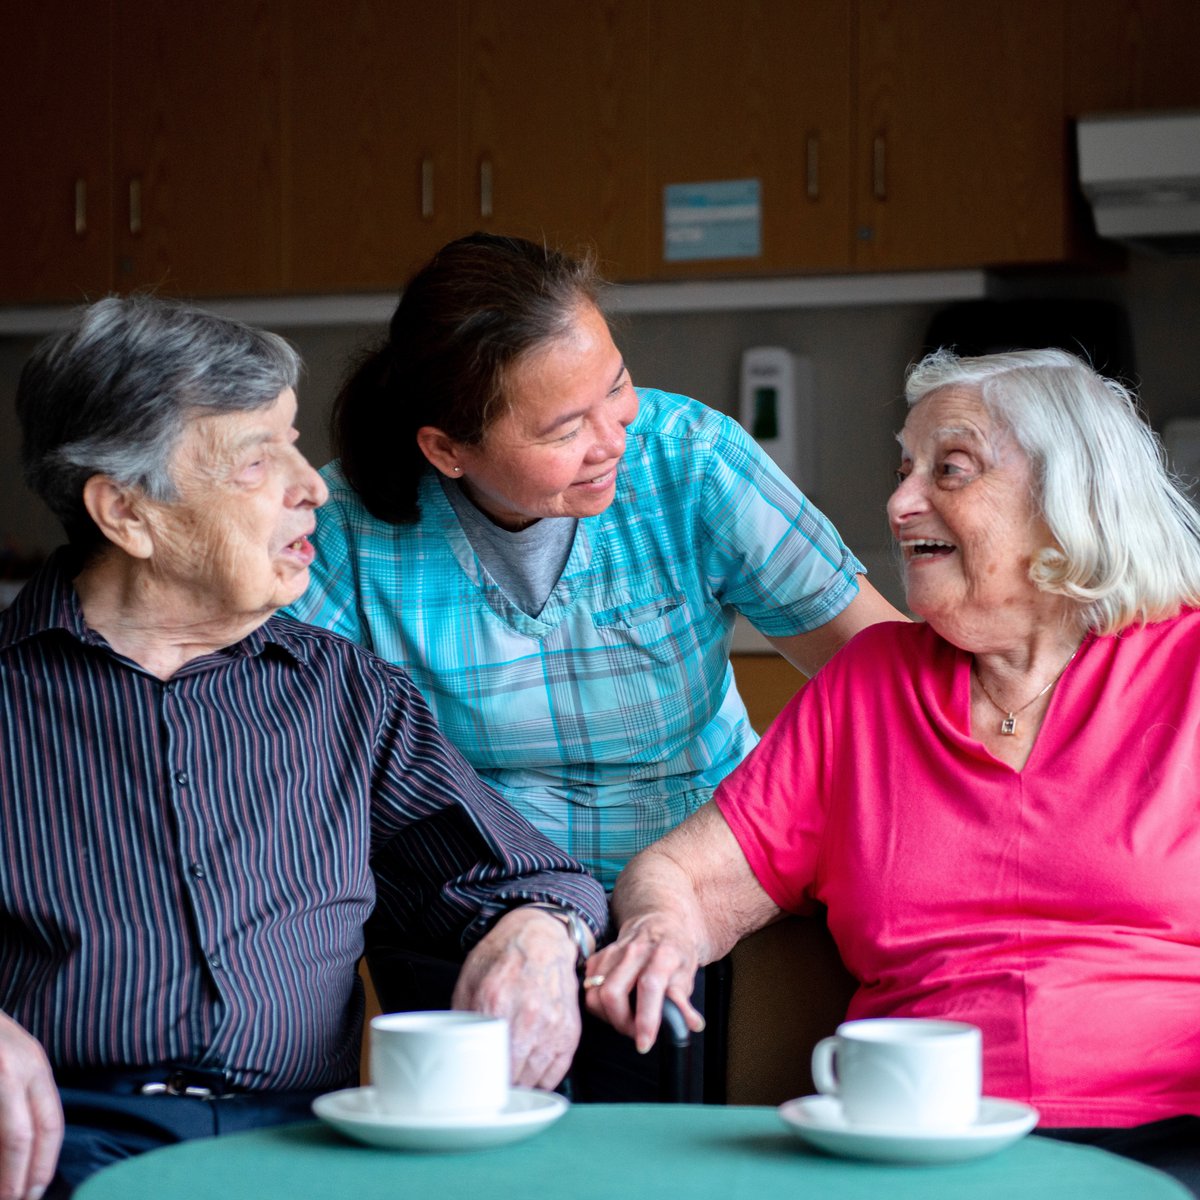 Did you know that in Ontario there are over 4 million people who provide physical or emotional support to a family member, friend, or neighbour? This #NationalCaregiverMonth, join us in celebrating and supporting the incredible people who devote their time to caring for others!